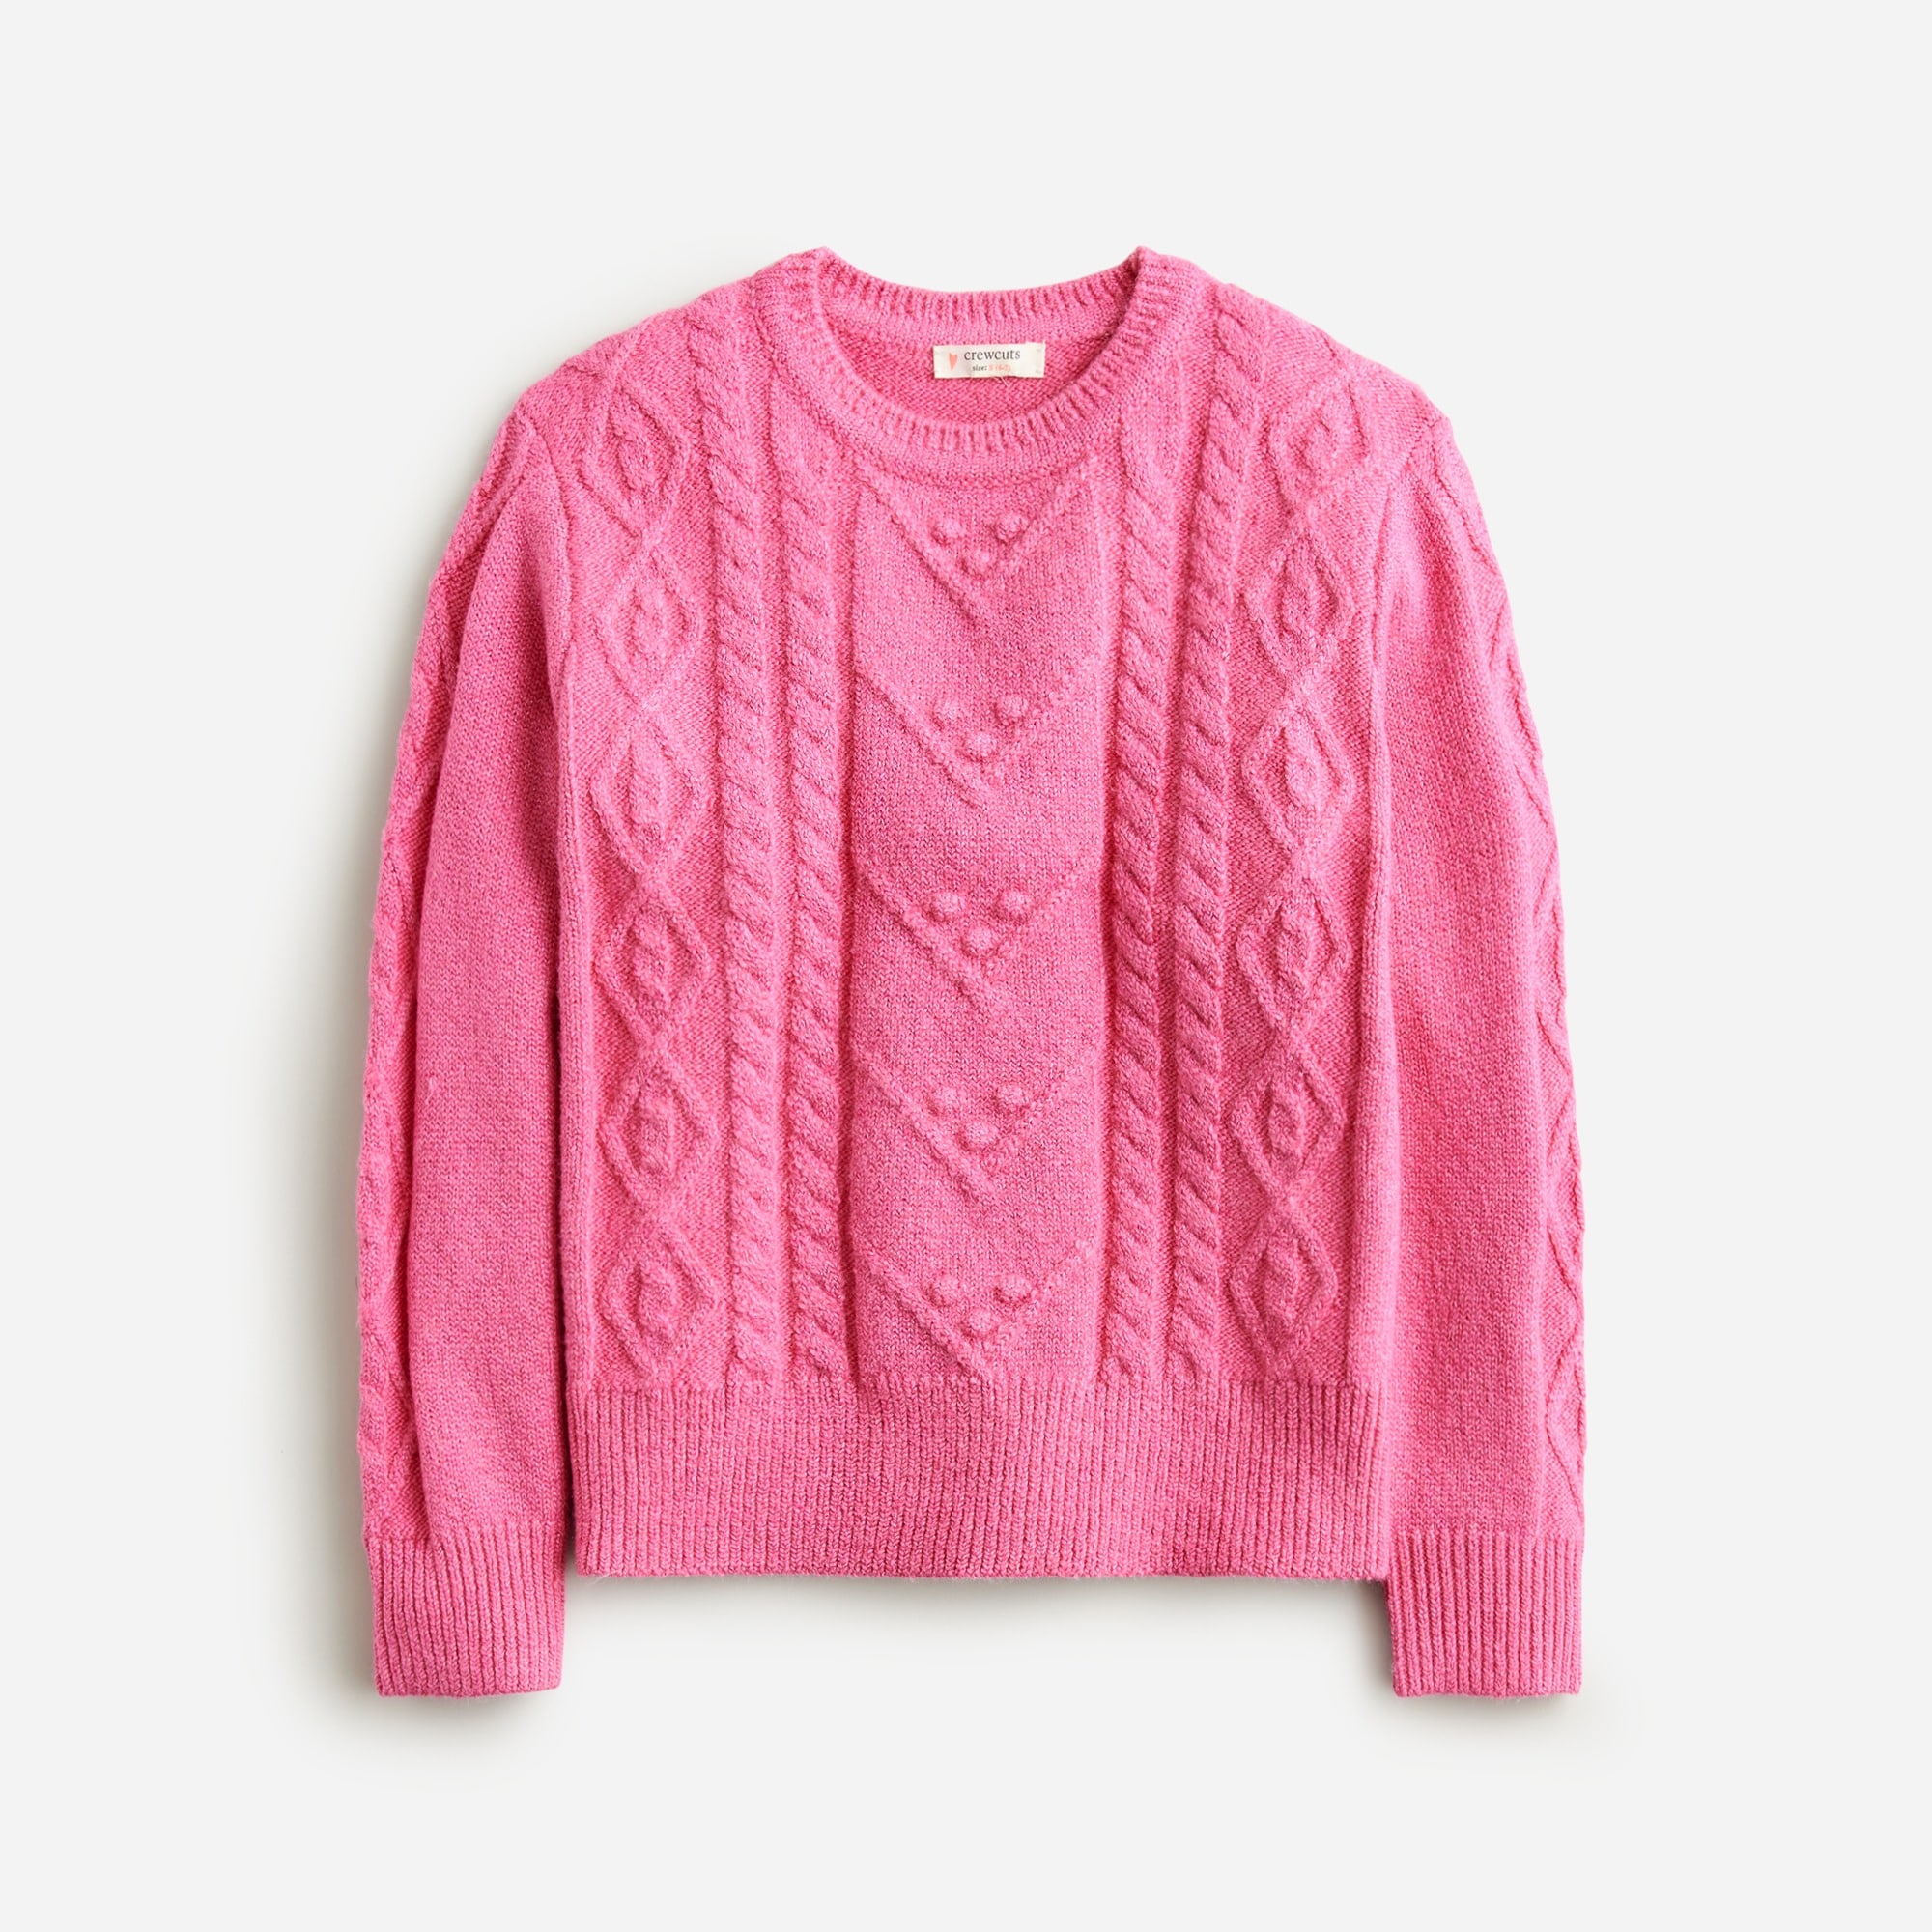 J.Crew: Girls' Sparkle Cable-knit Sweater For Girls